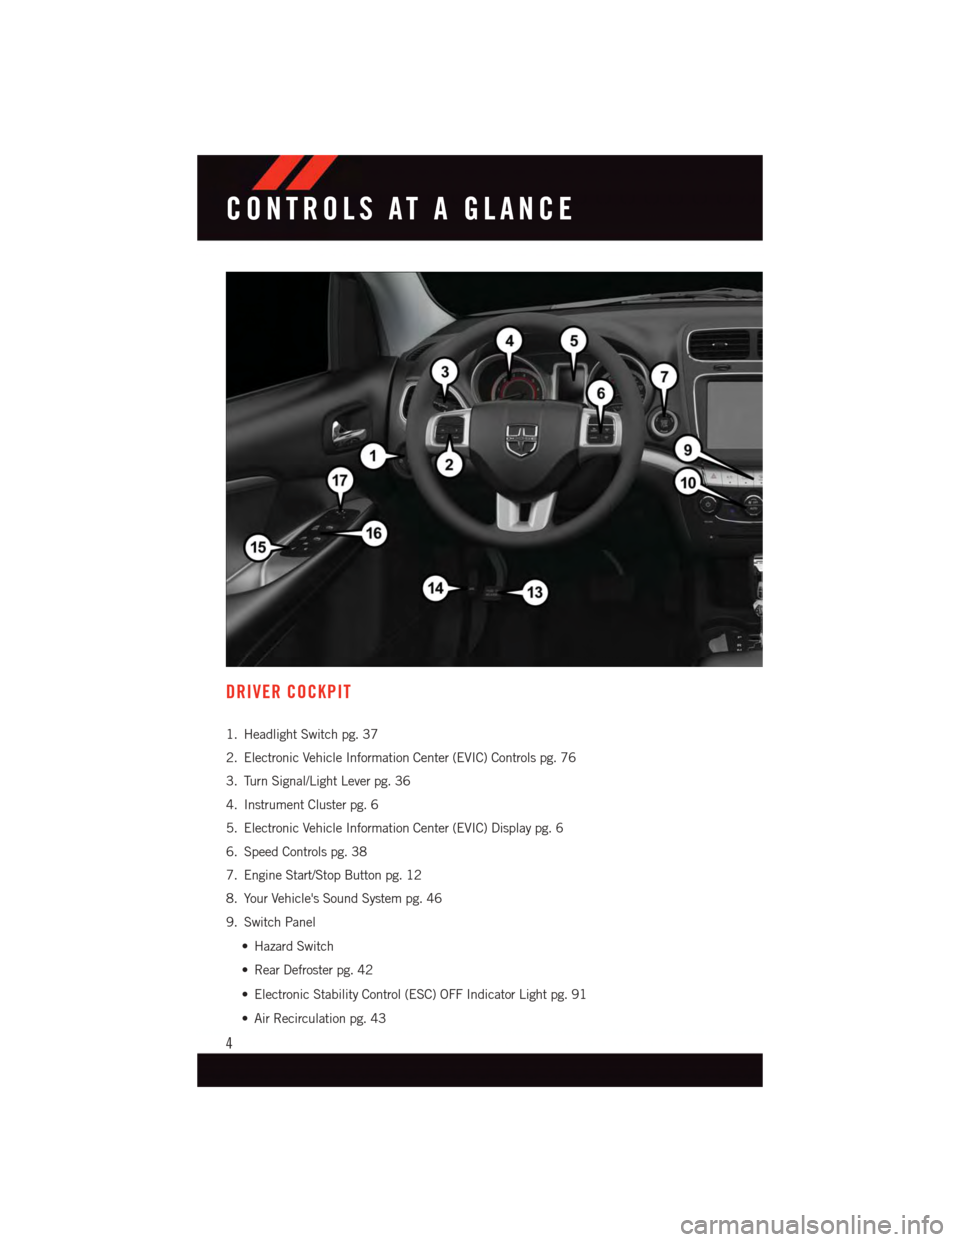 DODGE JOURNEY 2015 1.G User Guide DRIVER COCKPIT
1. Headlight Switch pg. 37
2. Electronic Vehicle Information Center (EVIC) Controls pg. 76
3. Turn Signal/Light Lever pg. 36
4. Instrument Cluster pg. 6
5. Electronic Vehicle Informatio